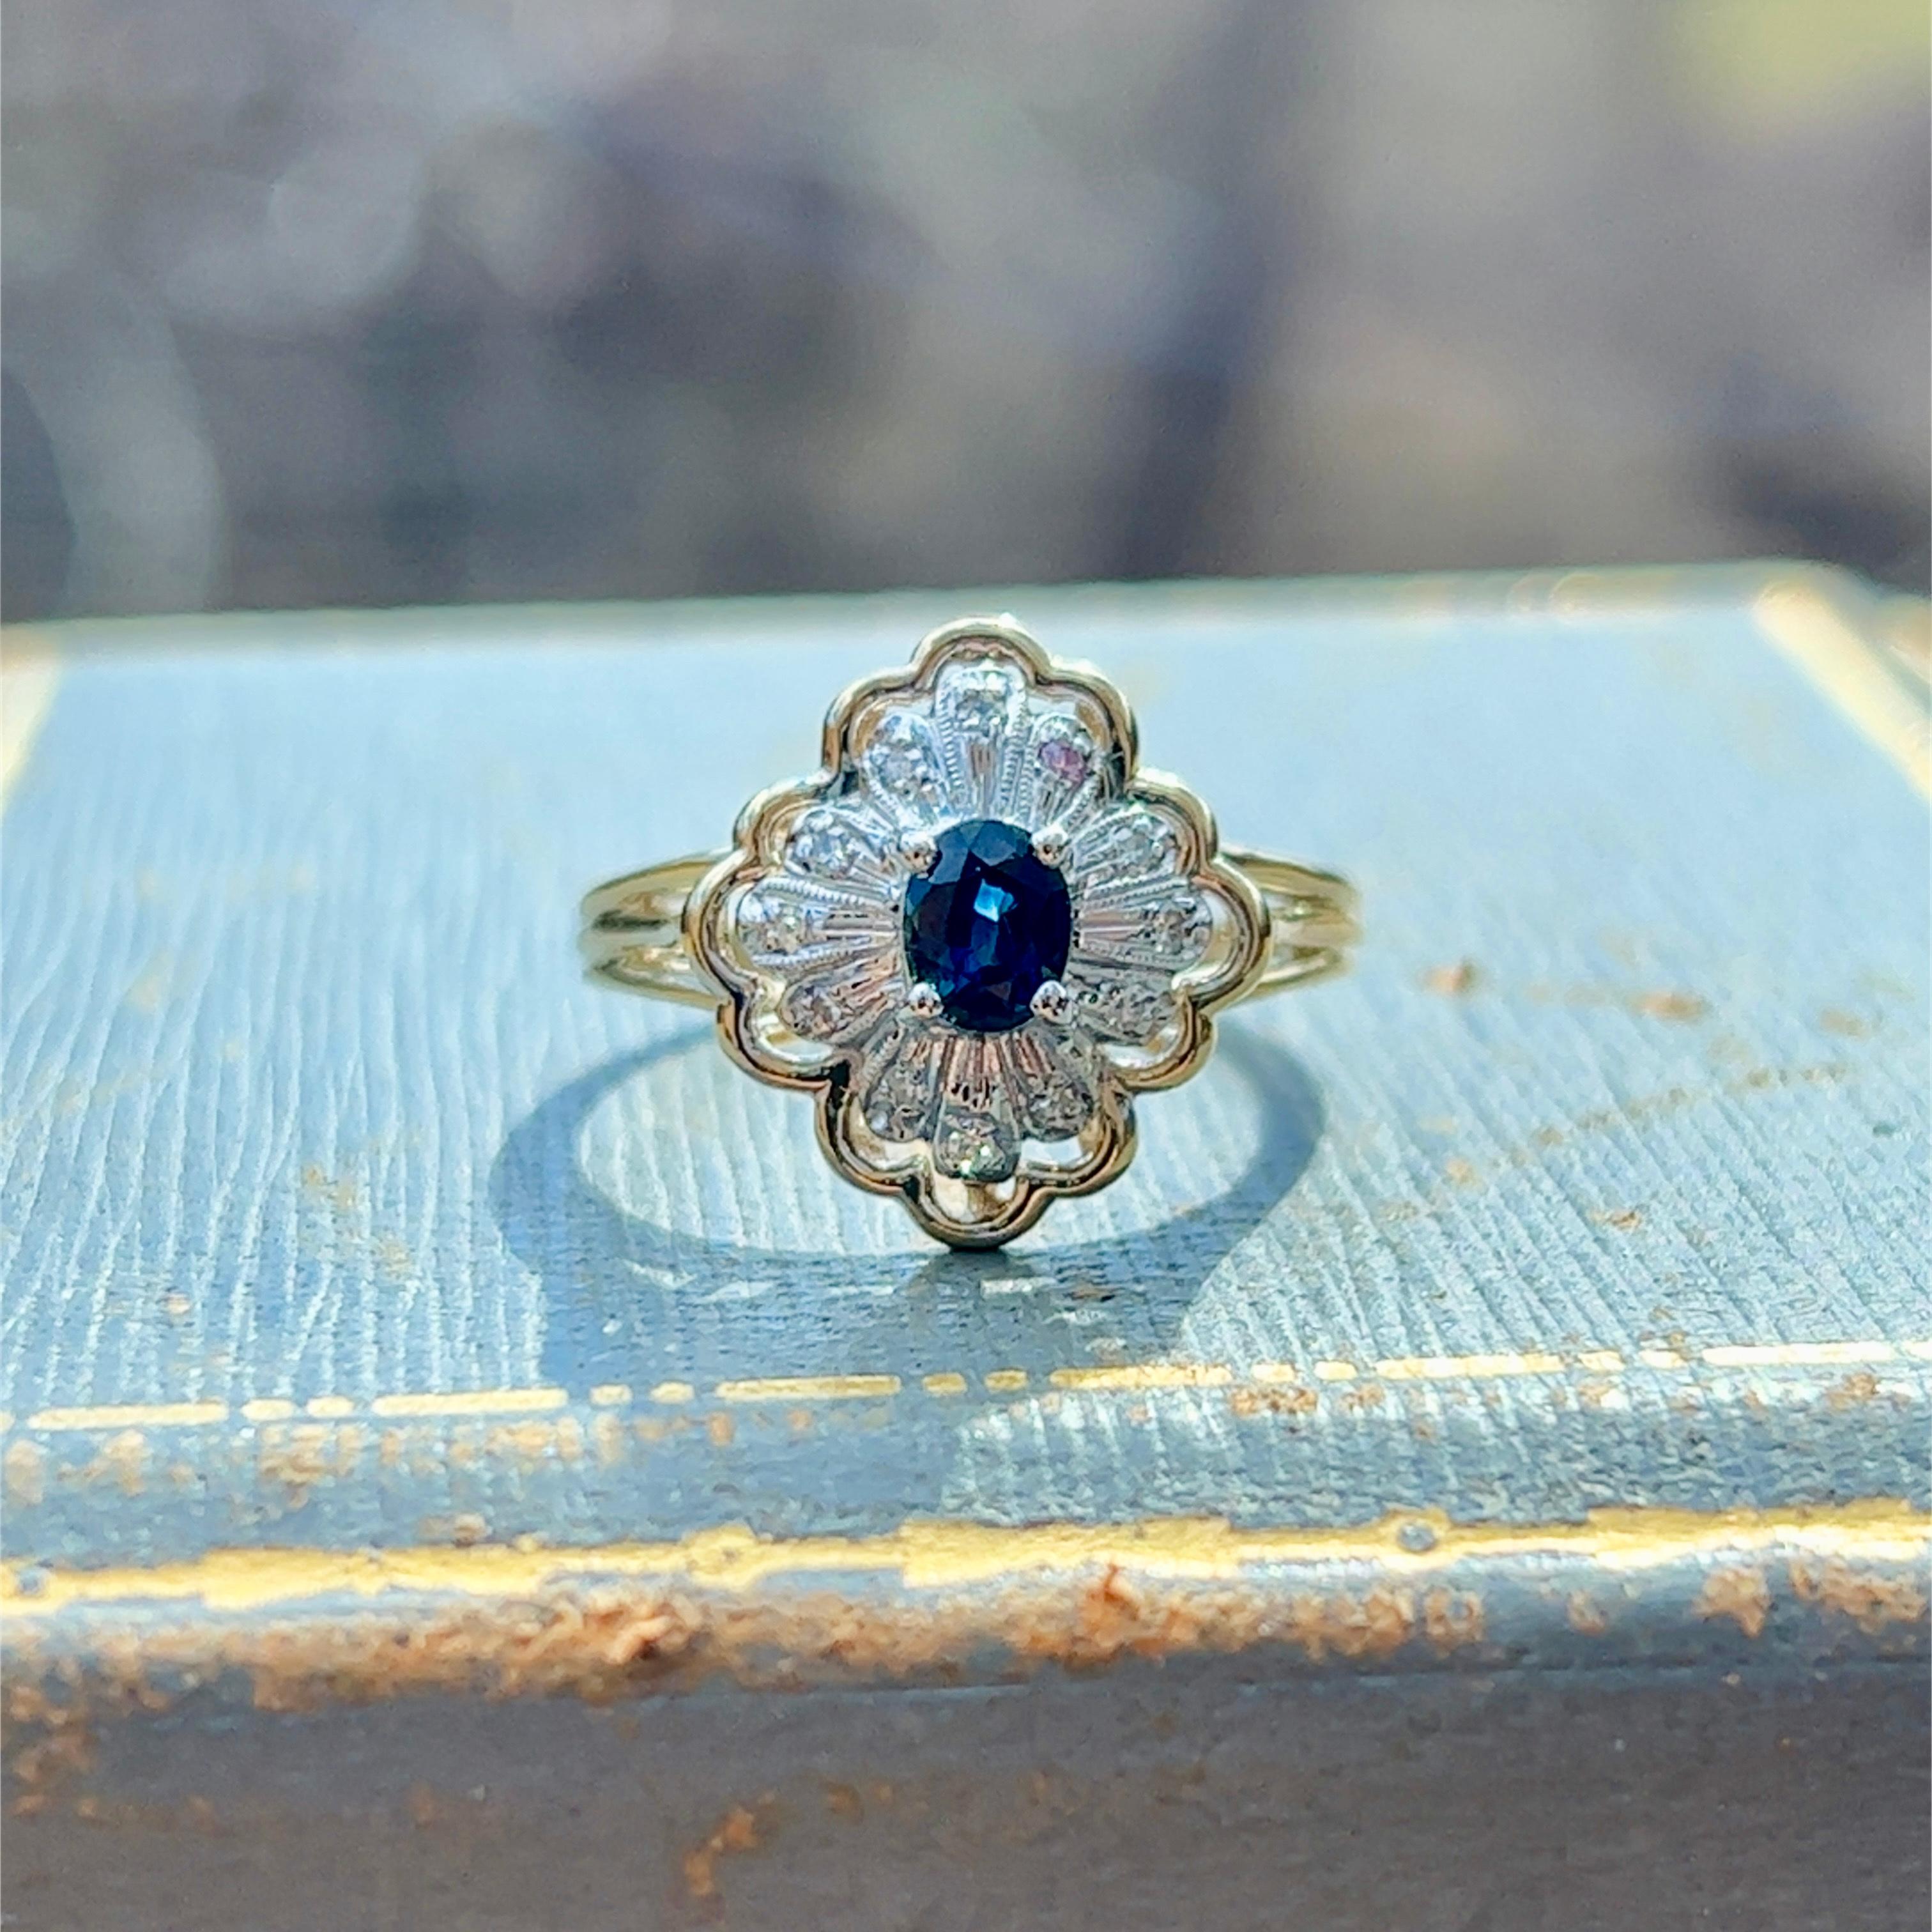 One 14-karat yellow and white gold cluster ring set with one  (1) 5x3.8mm oval natural blue sapphire, and twelve (12) single cut diamonds, approximately 0.20-carat total weight with matching H/I color and SI1 clarity. The ring is a finger size 7.5